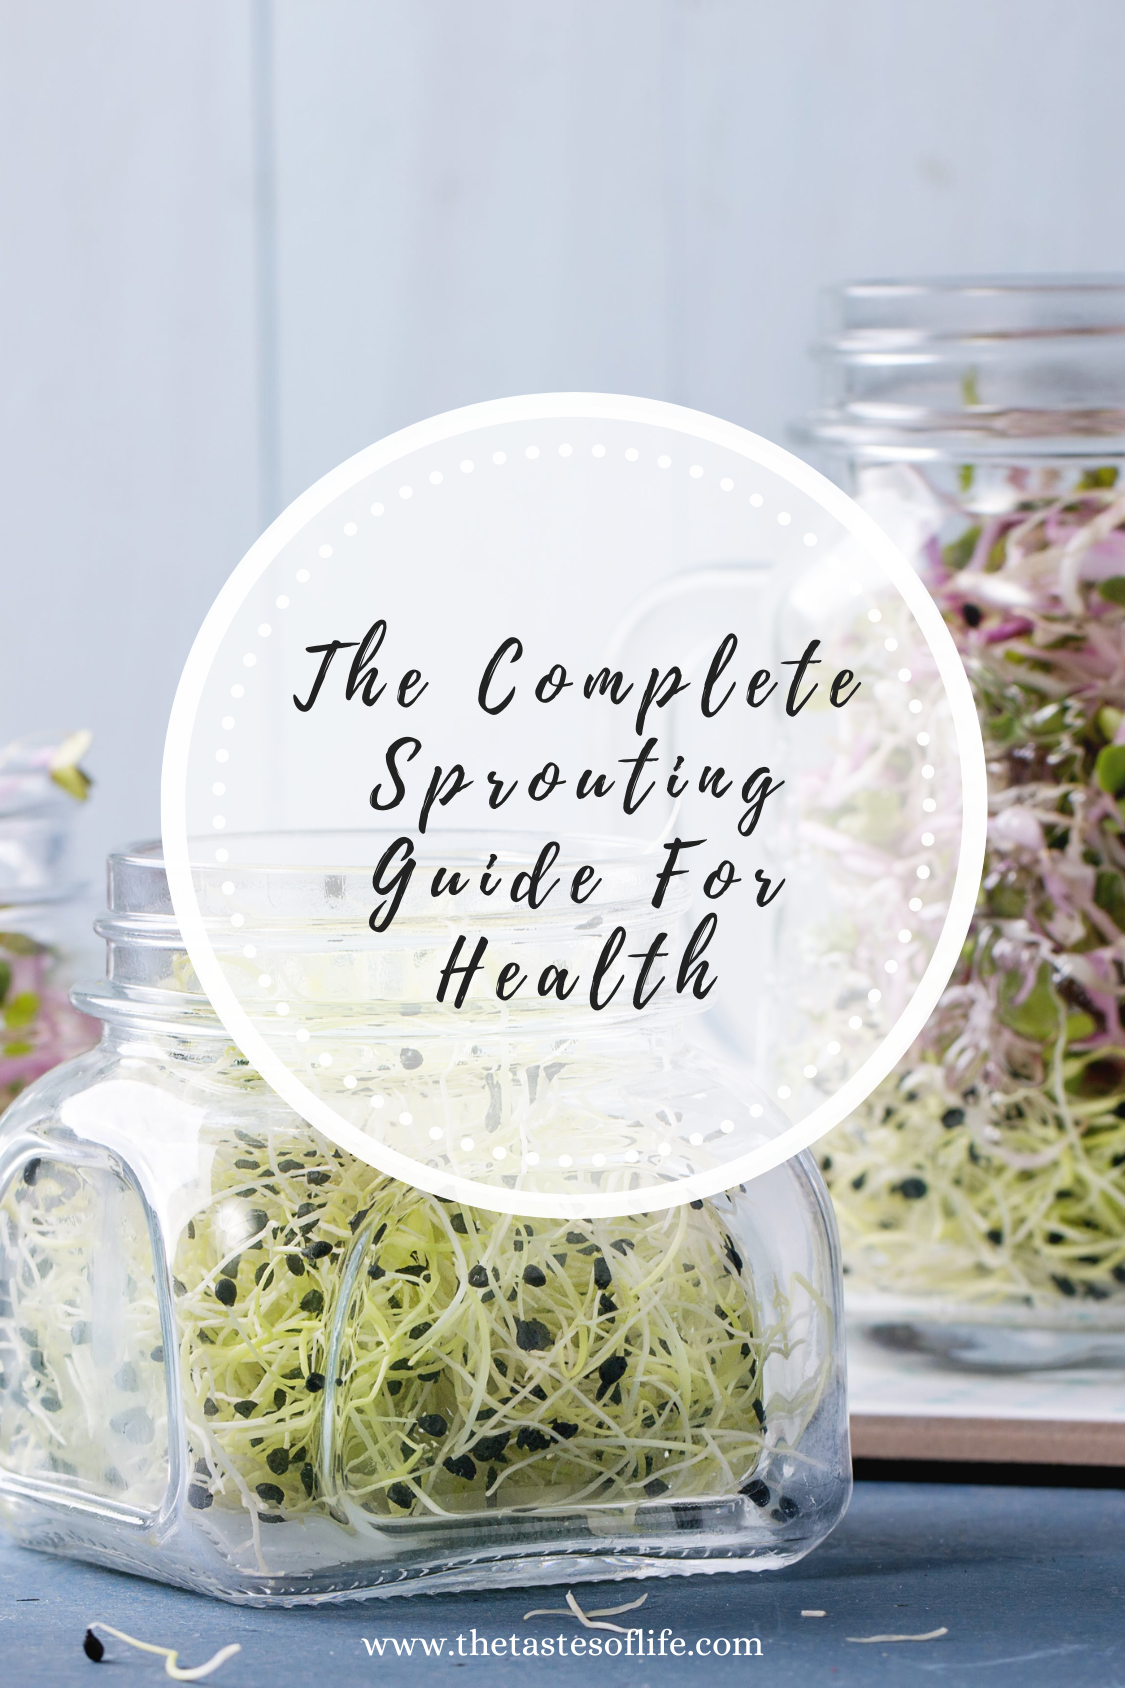 The Complete Sprouting Guide for Health